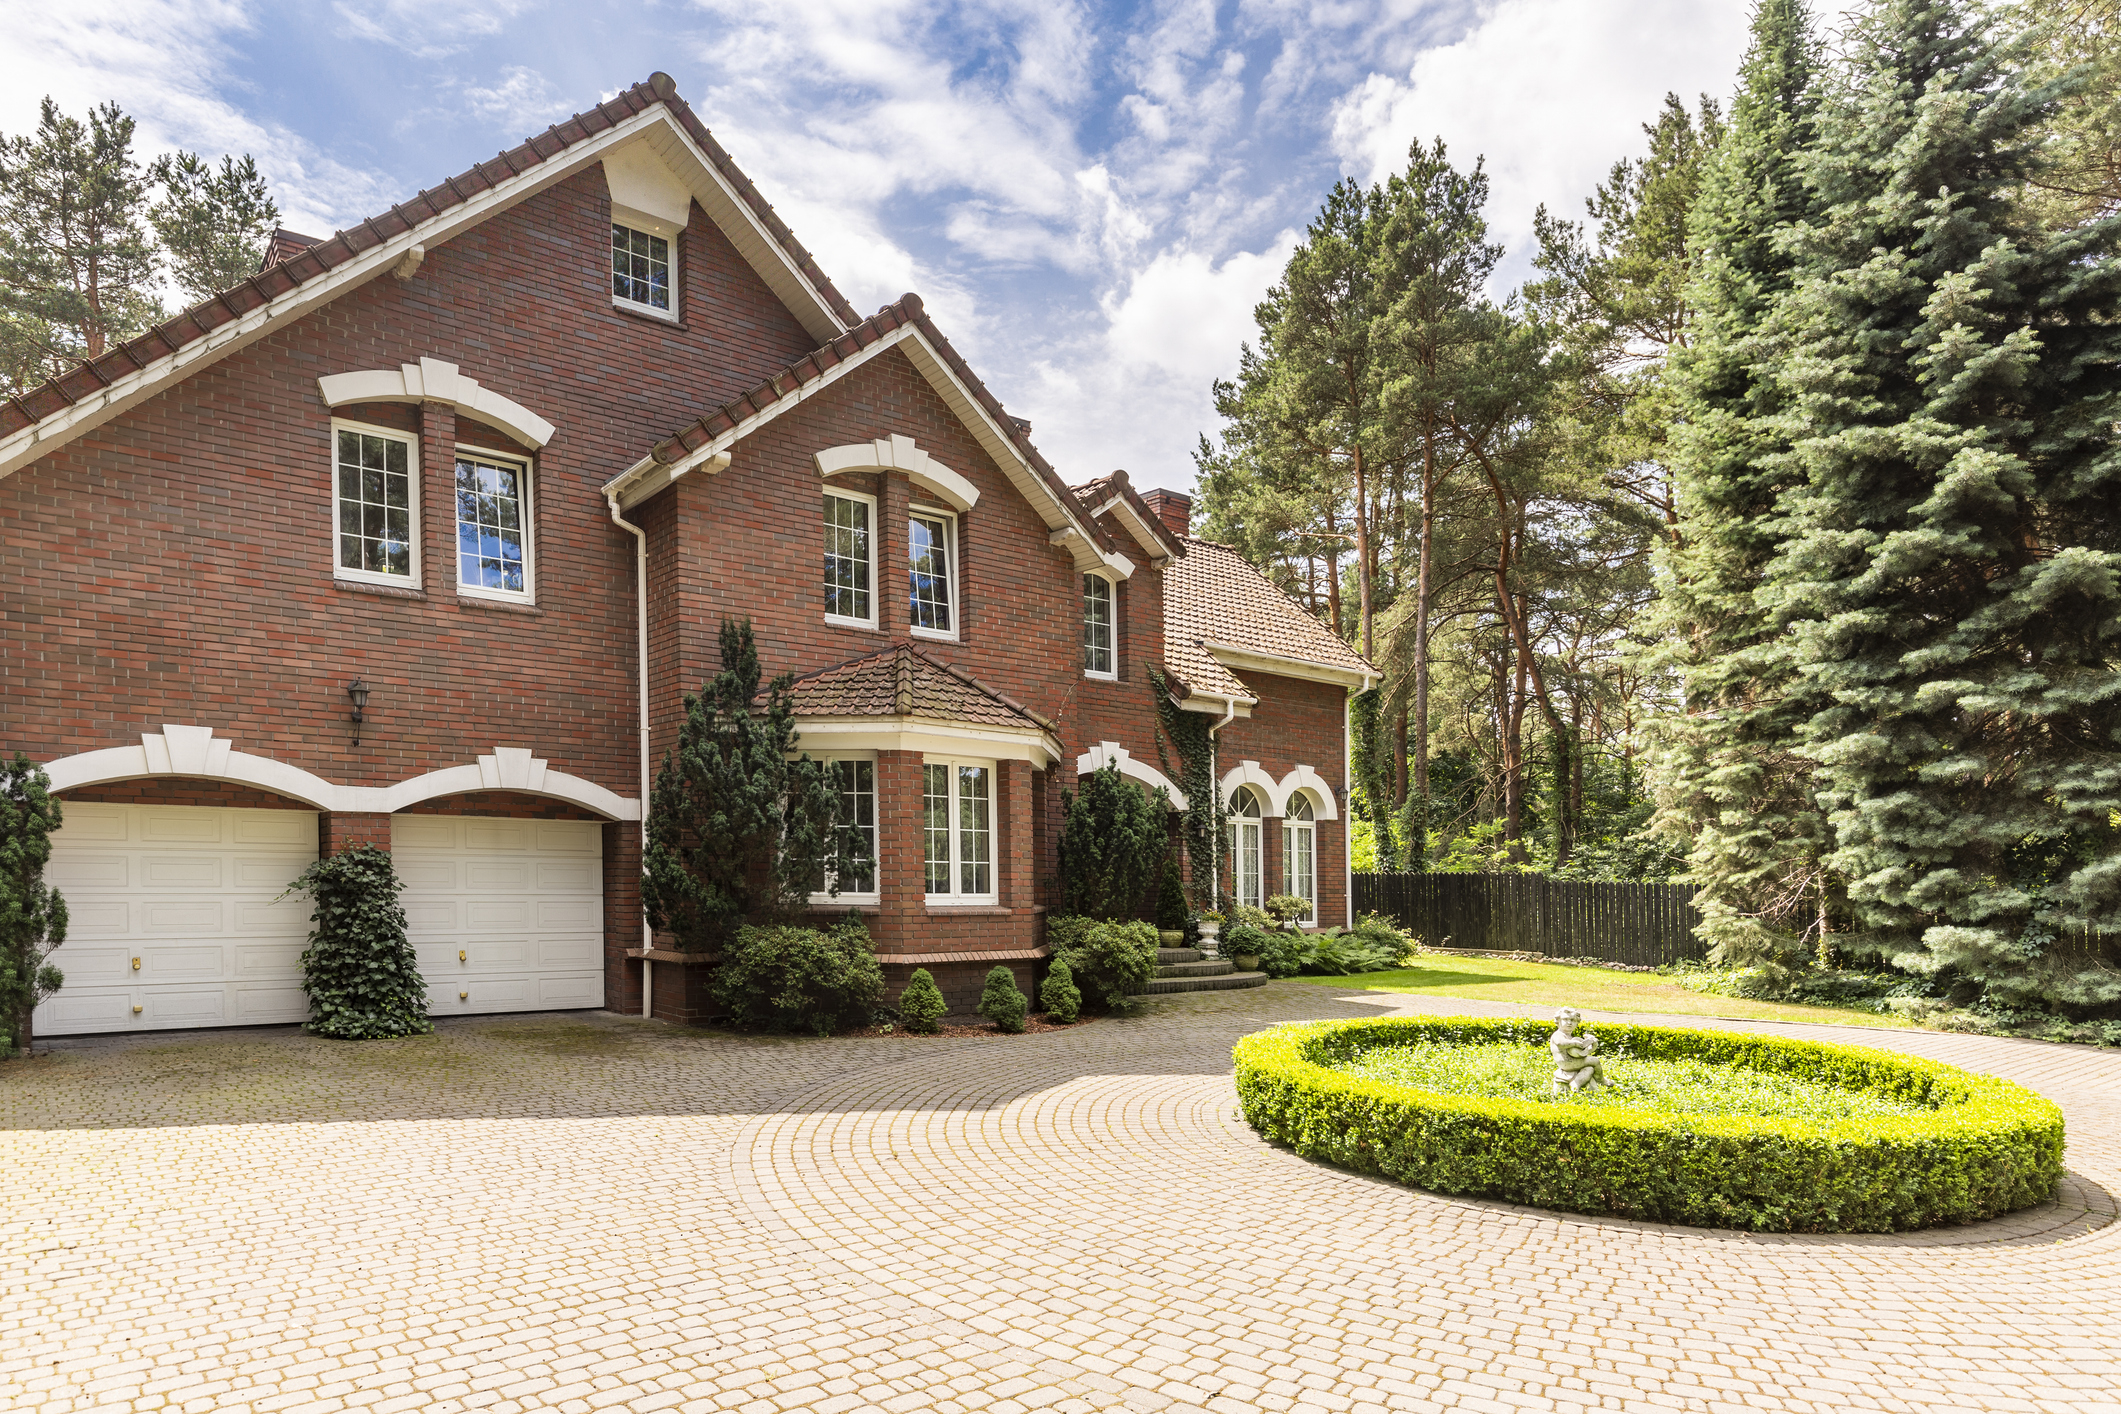 A spacious brick house with a three-car garage, surrounded by trees and neatly landscaped with a circular hedge design in the driveway